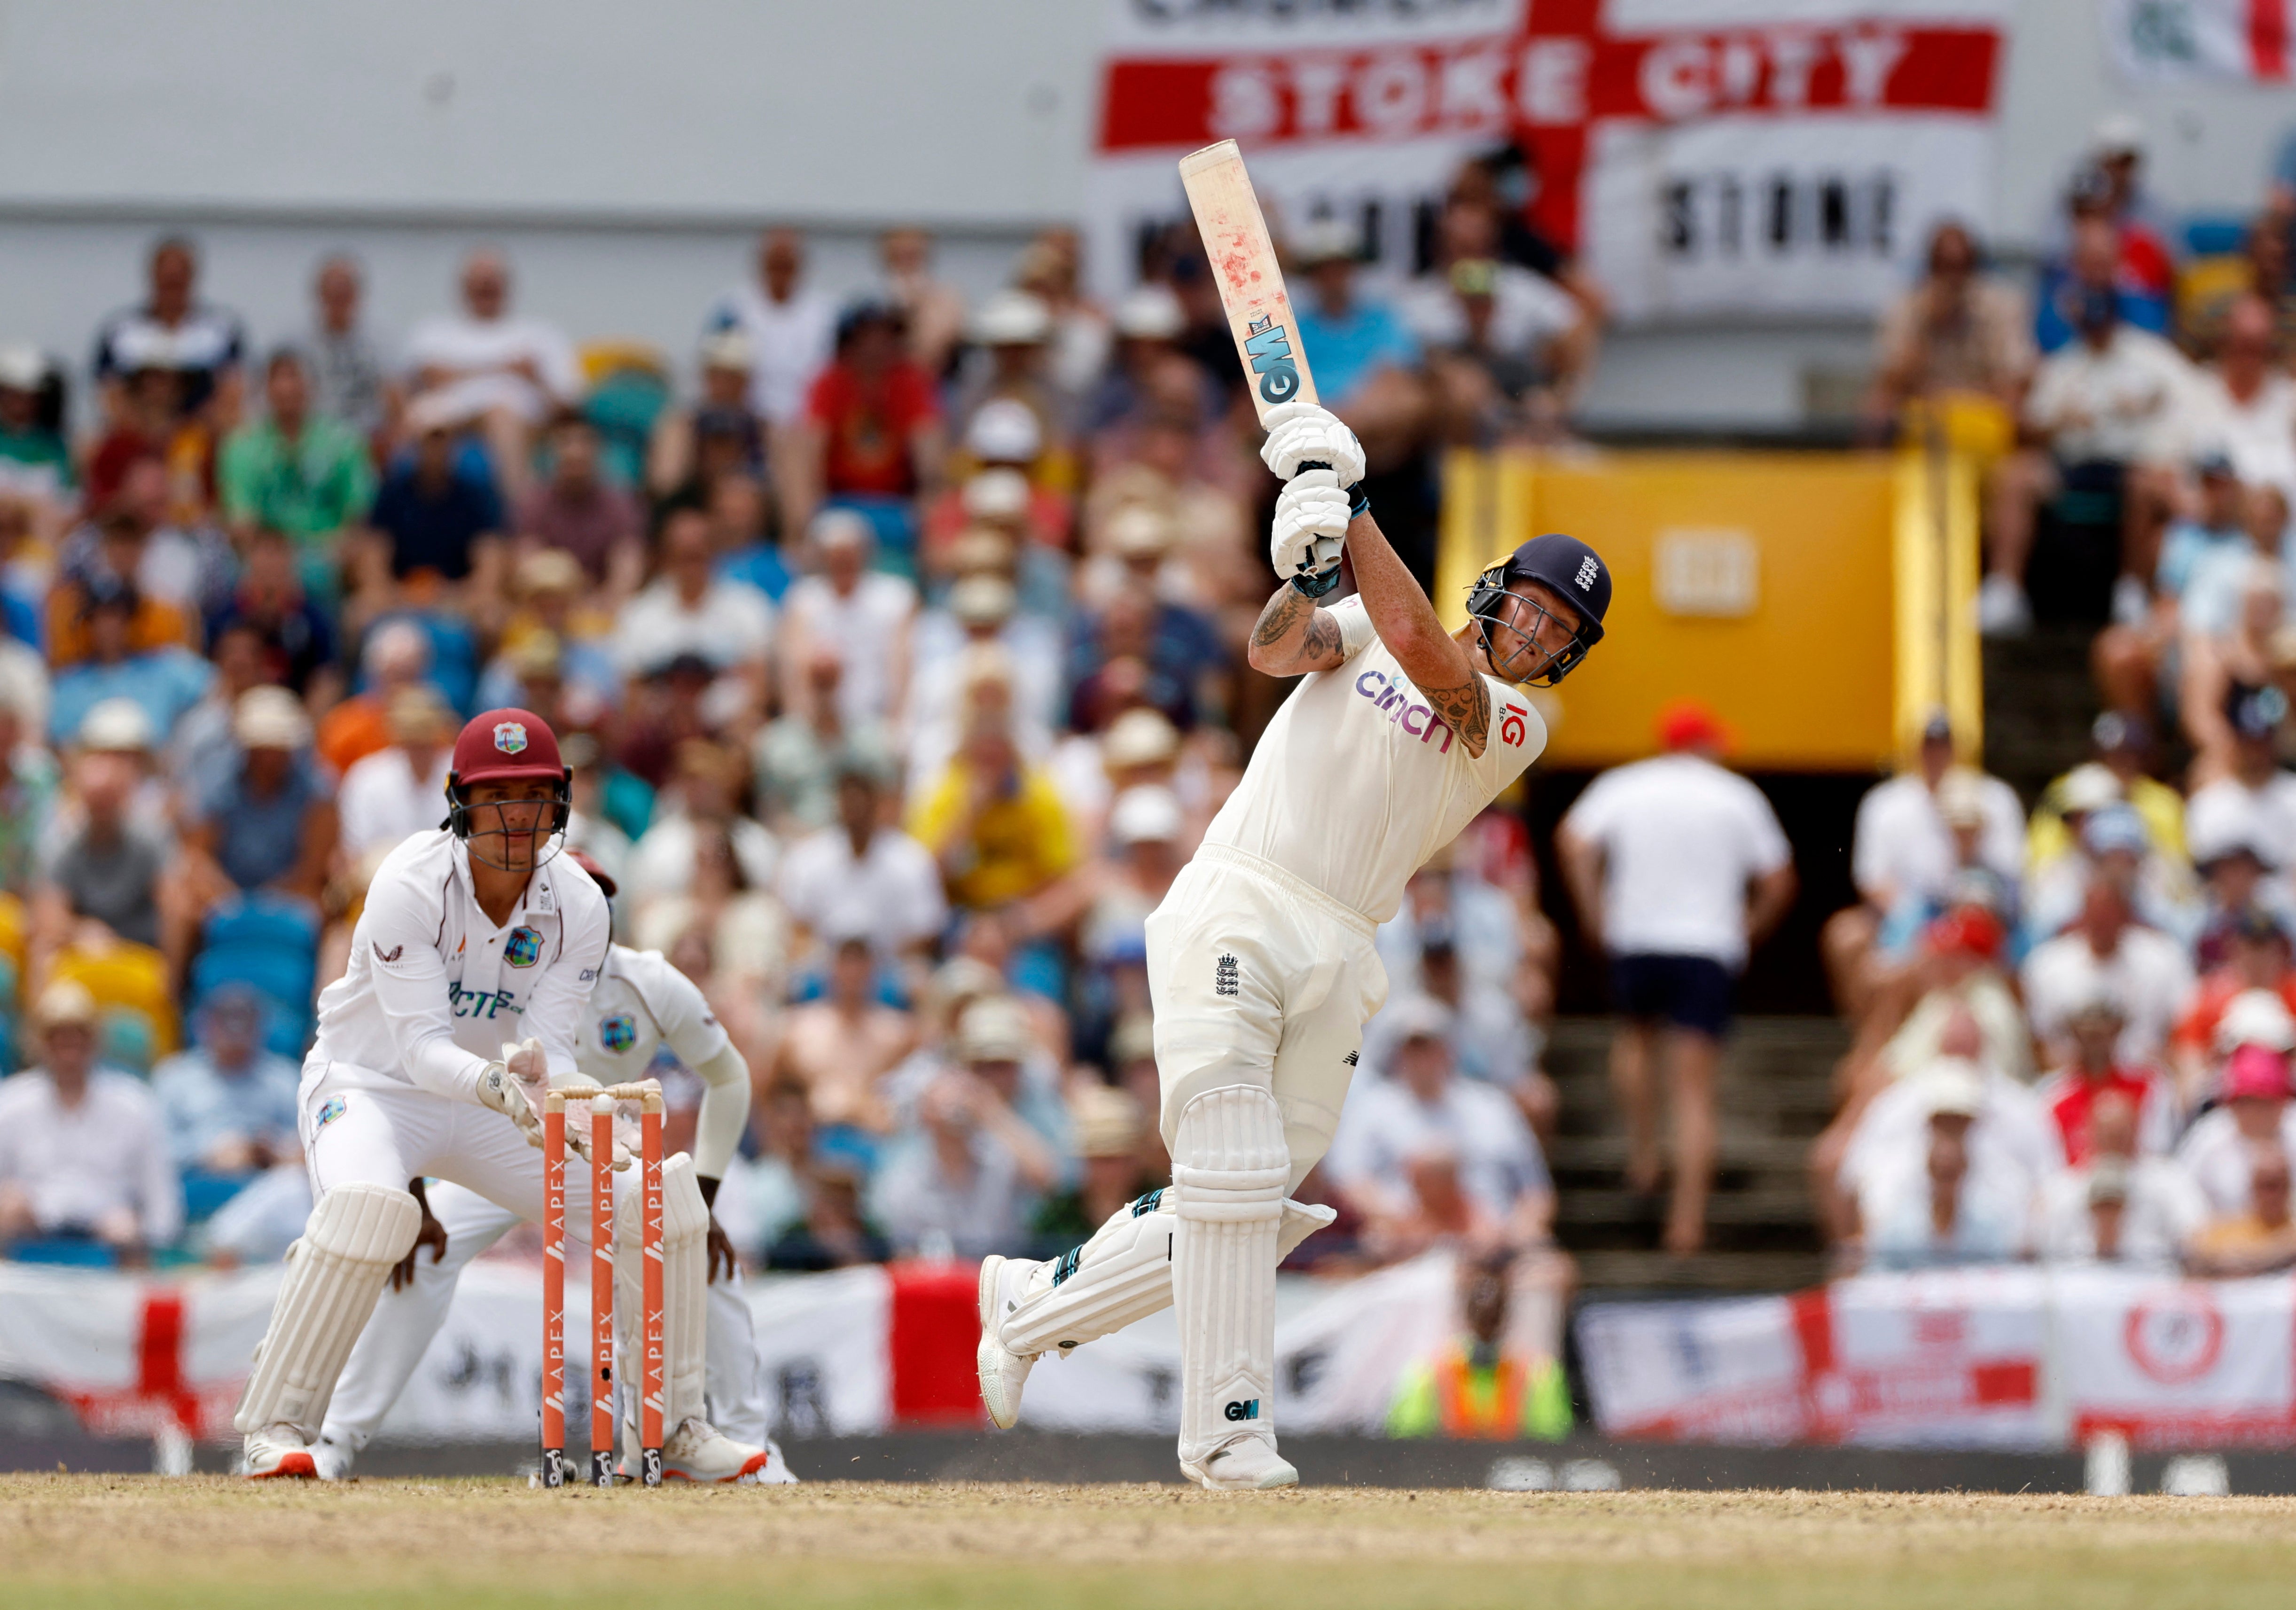 Ben Stokes hits a six off the bowling of Veerasammy Permaul